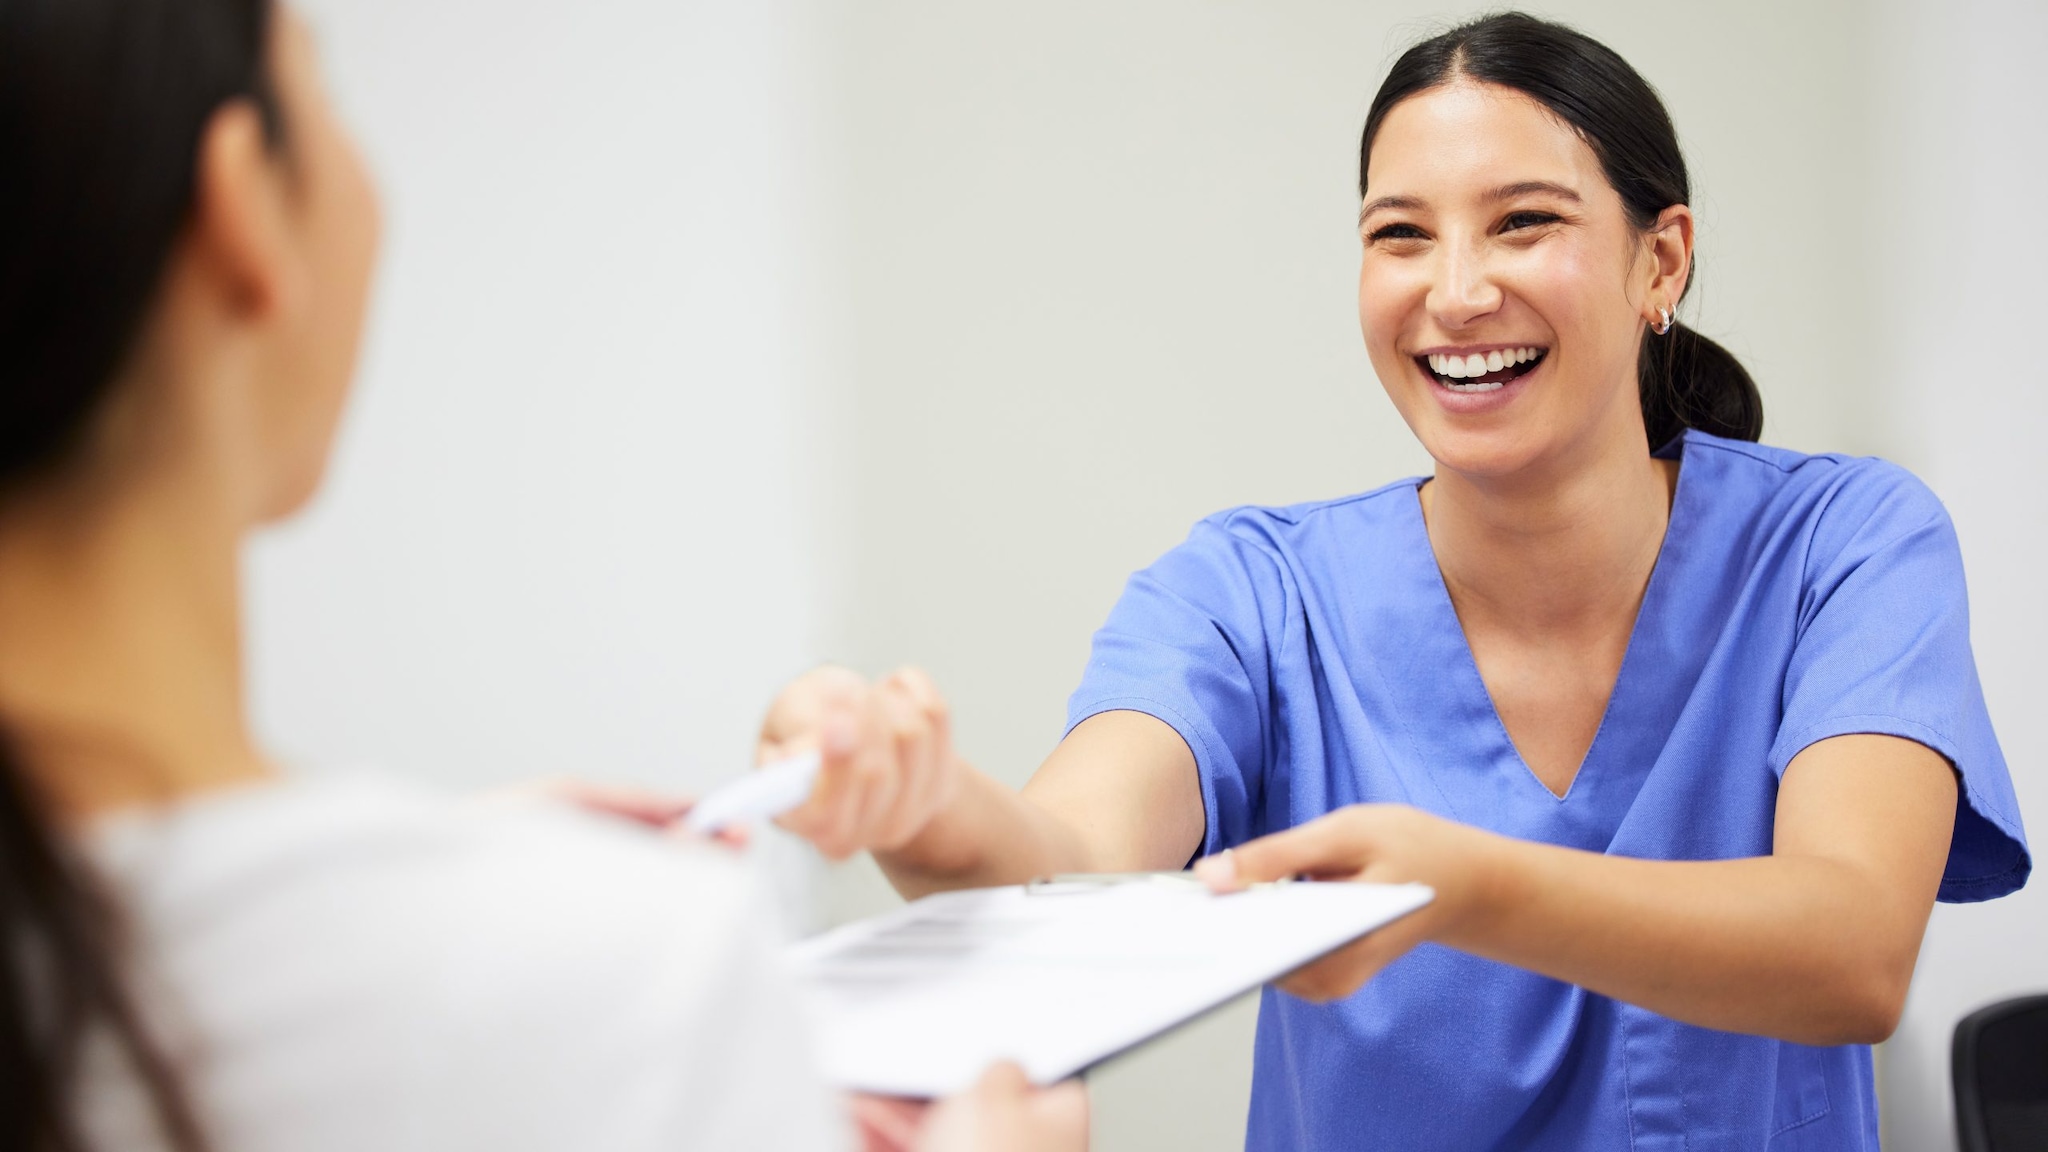 smiling woman wearing blue scrubs passing a piece of paper to another person